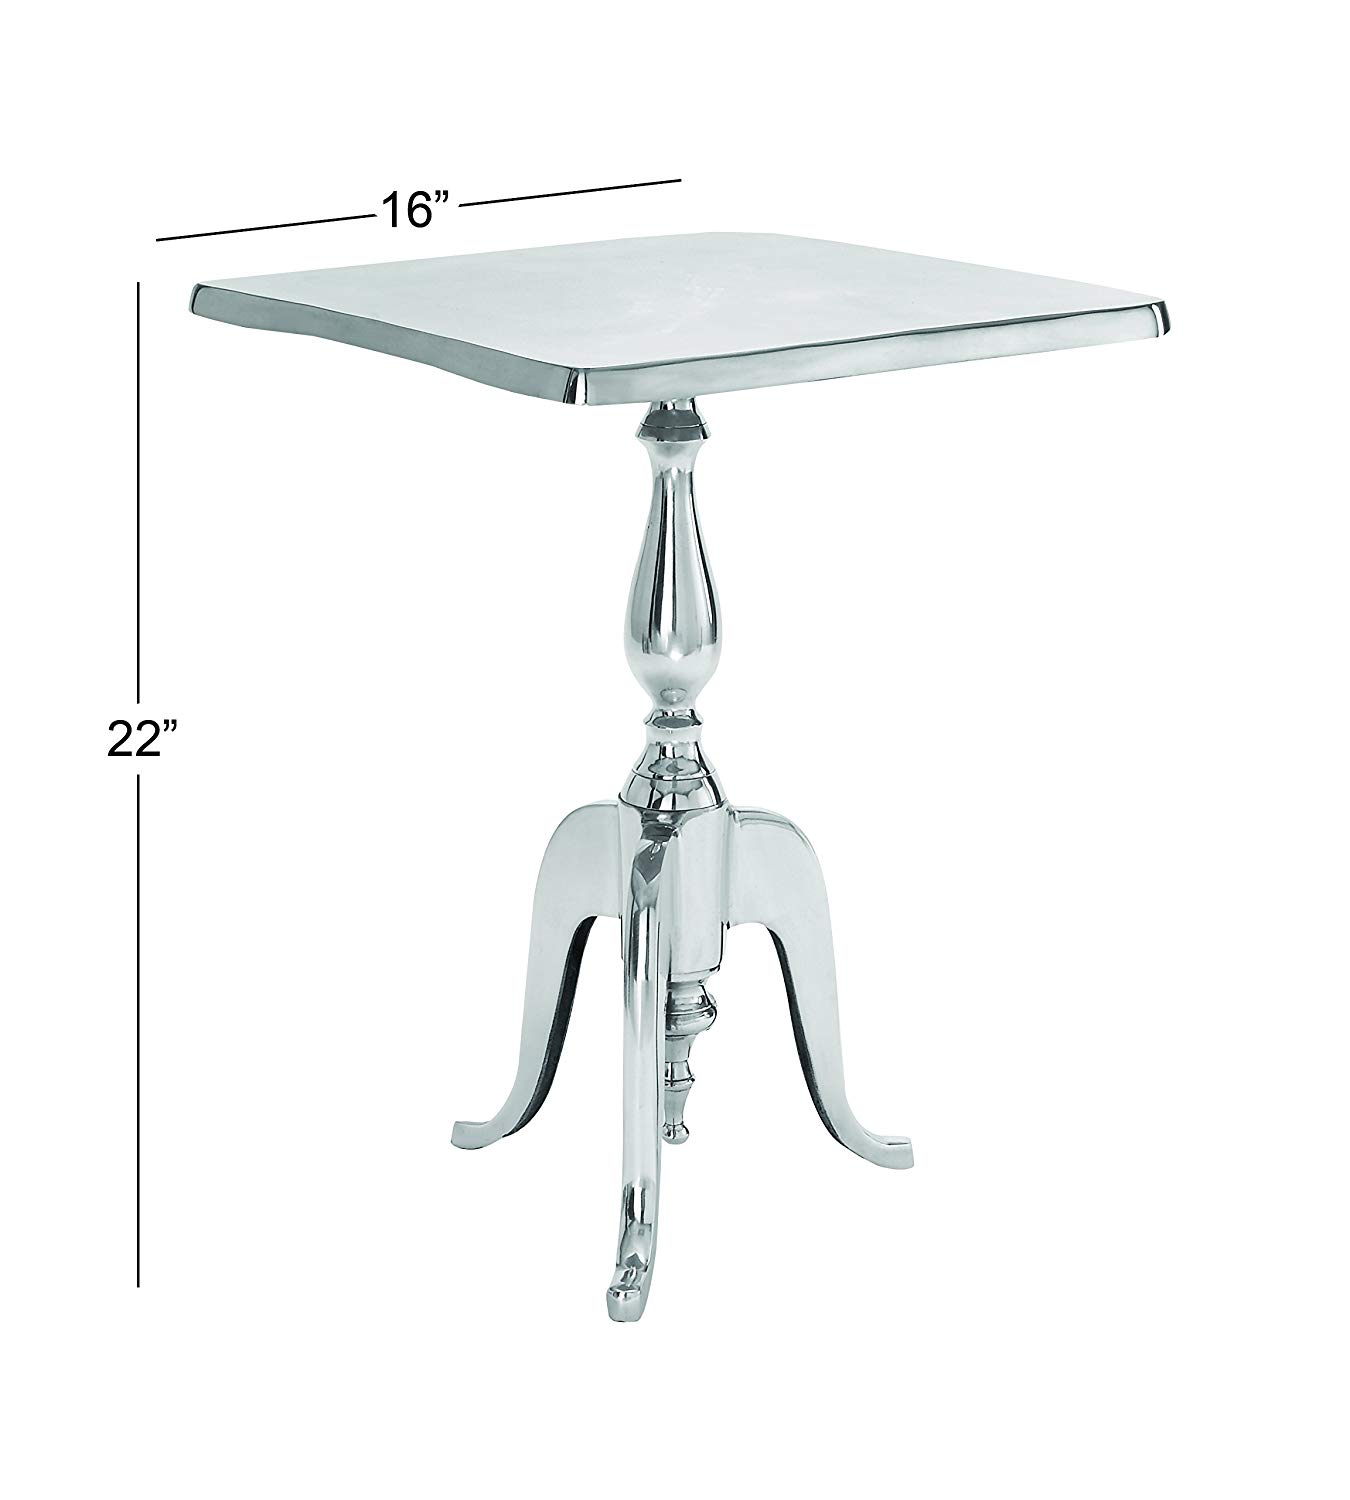 deco aluminum square accent table inch small silver kitchen dining round skirts decorator backyard furniture piece set farmhouse style chairs tables toronto metal legs pier coupon